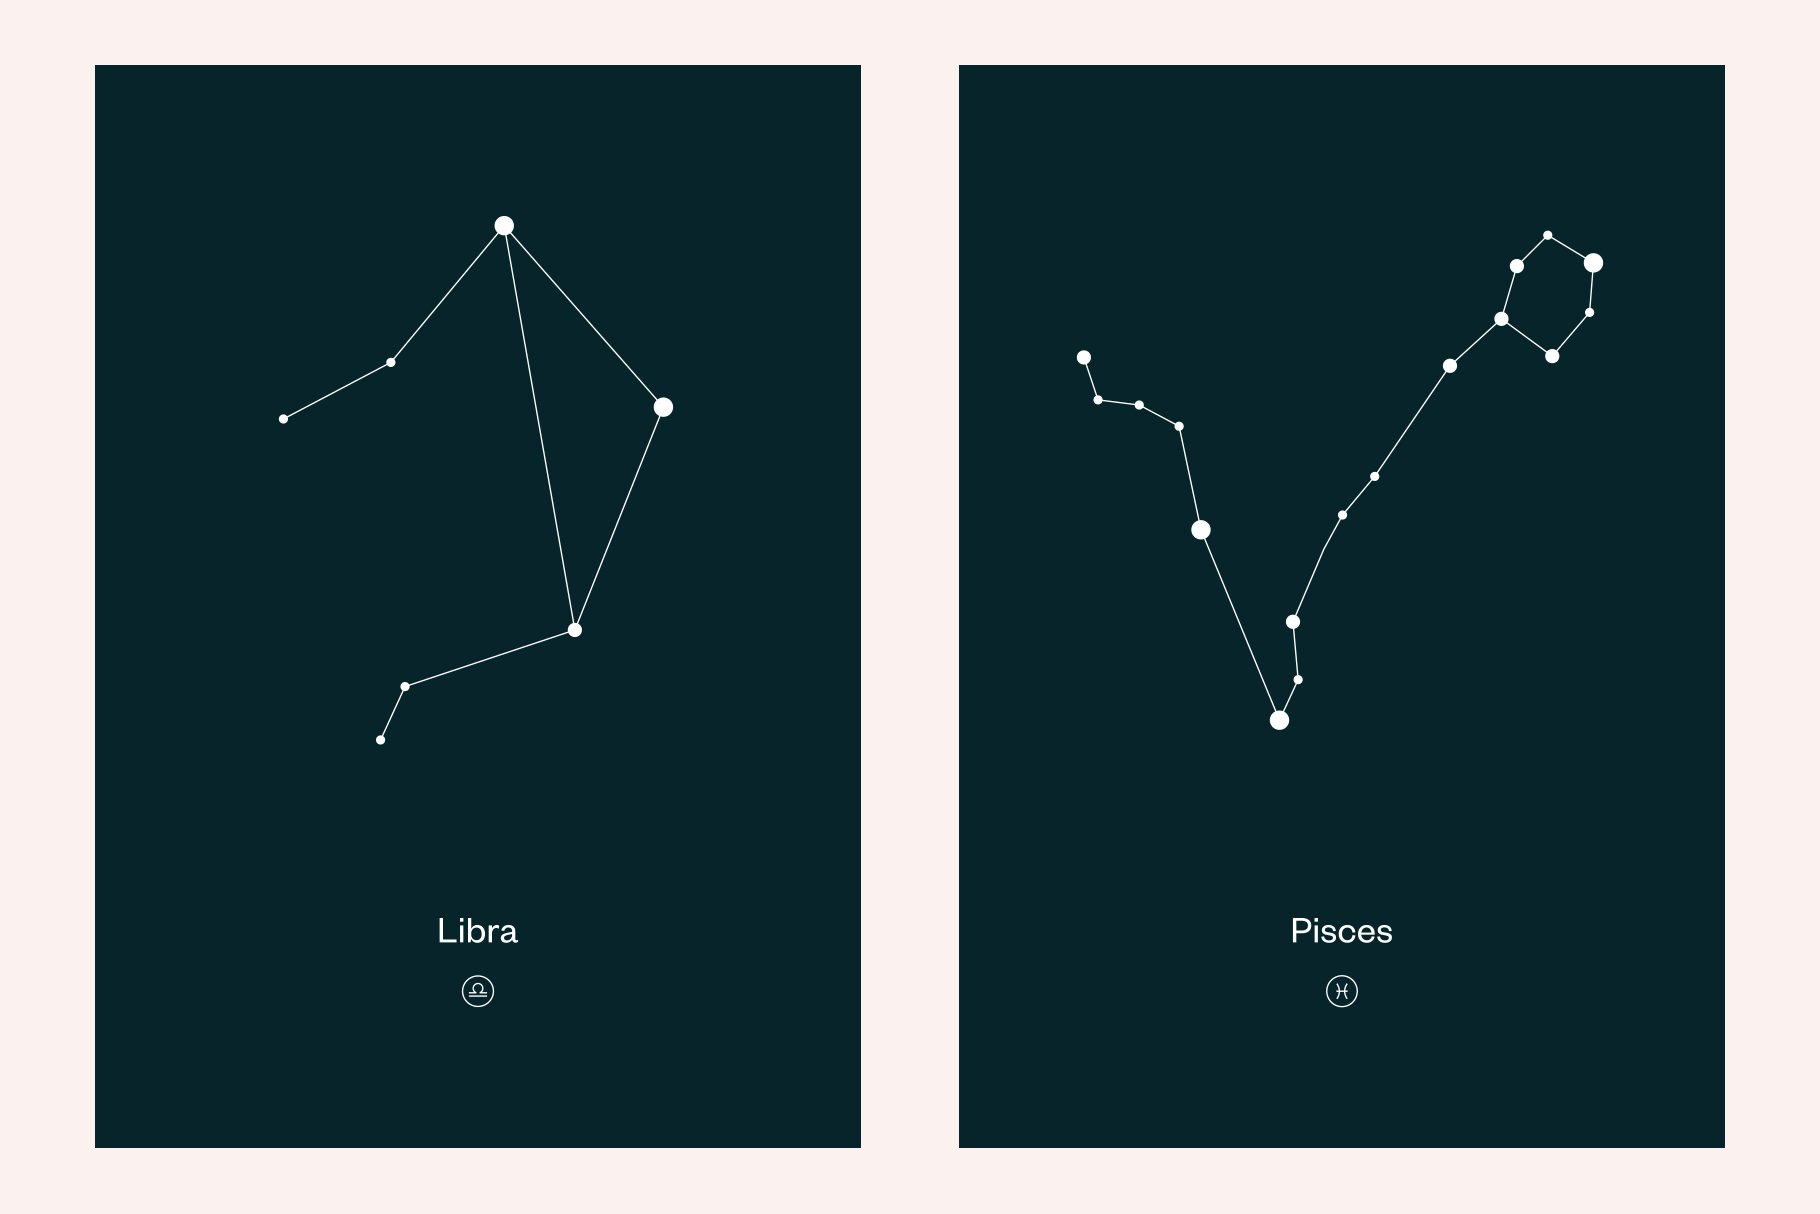 Libra and pisces on the night sky.